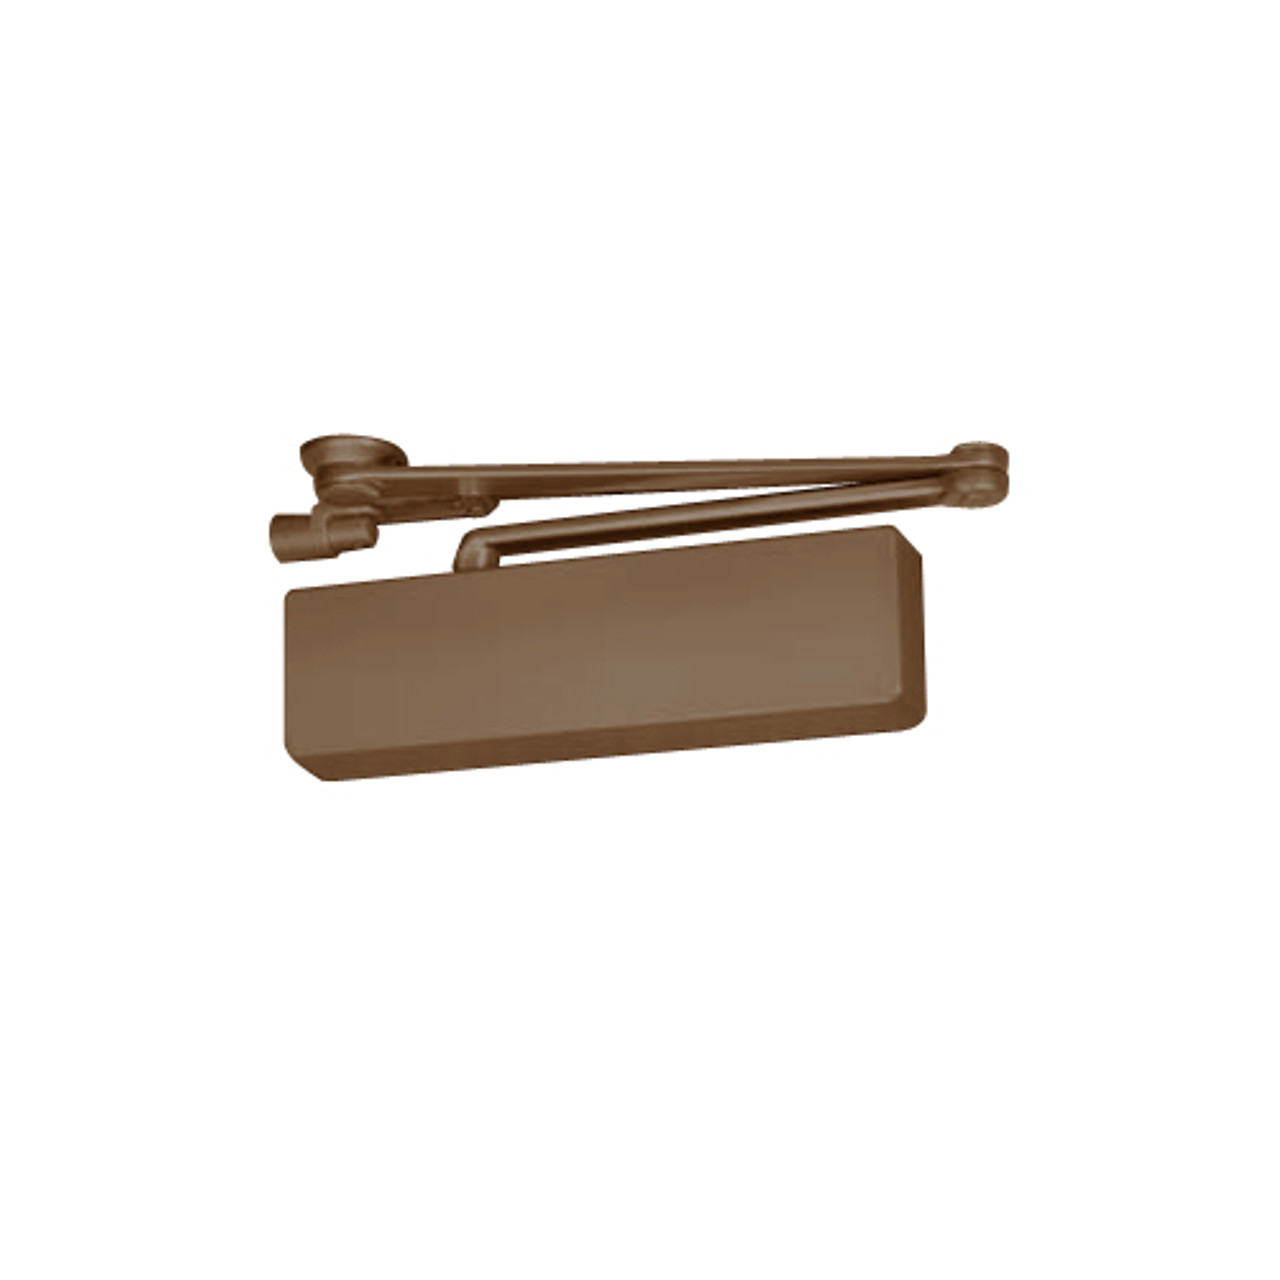 CPS7570T-691-LH Norton 7570 Series Security Door CloserPlus Spring Arm with Thumbturn Hold Open in Dull Bronze Finish